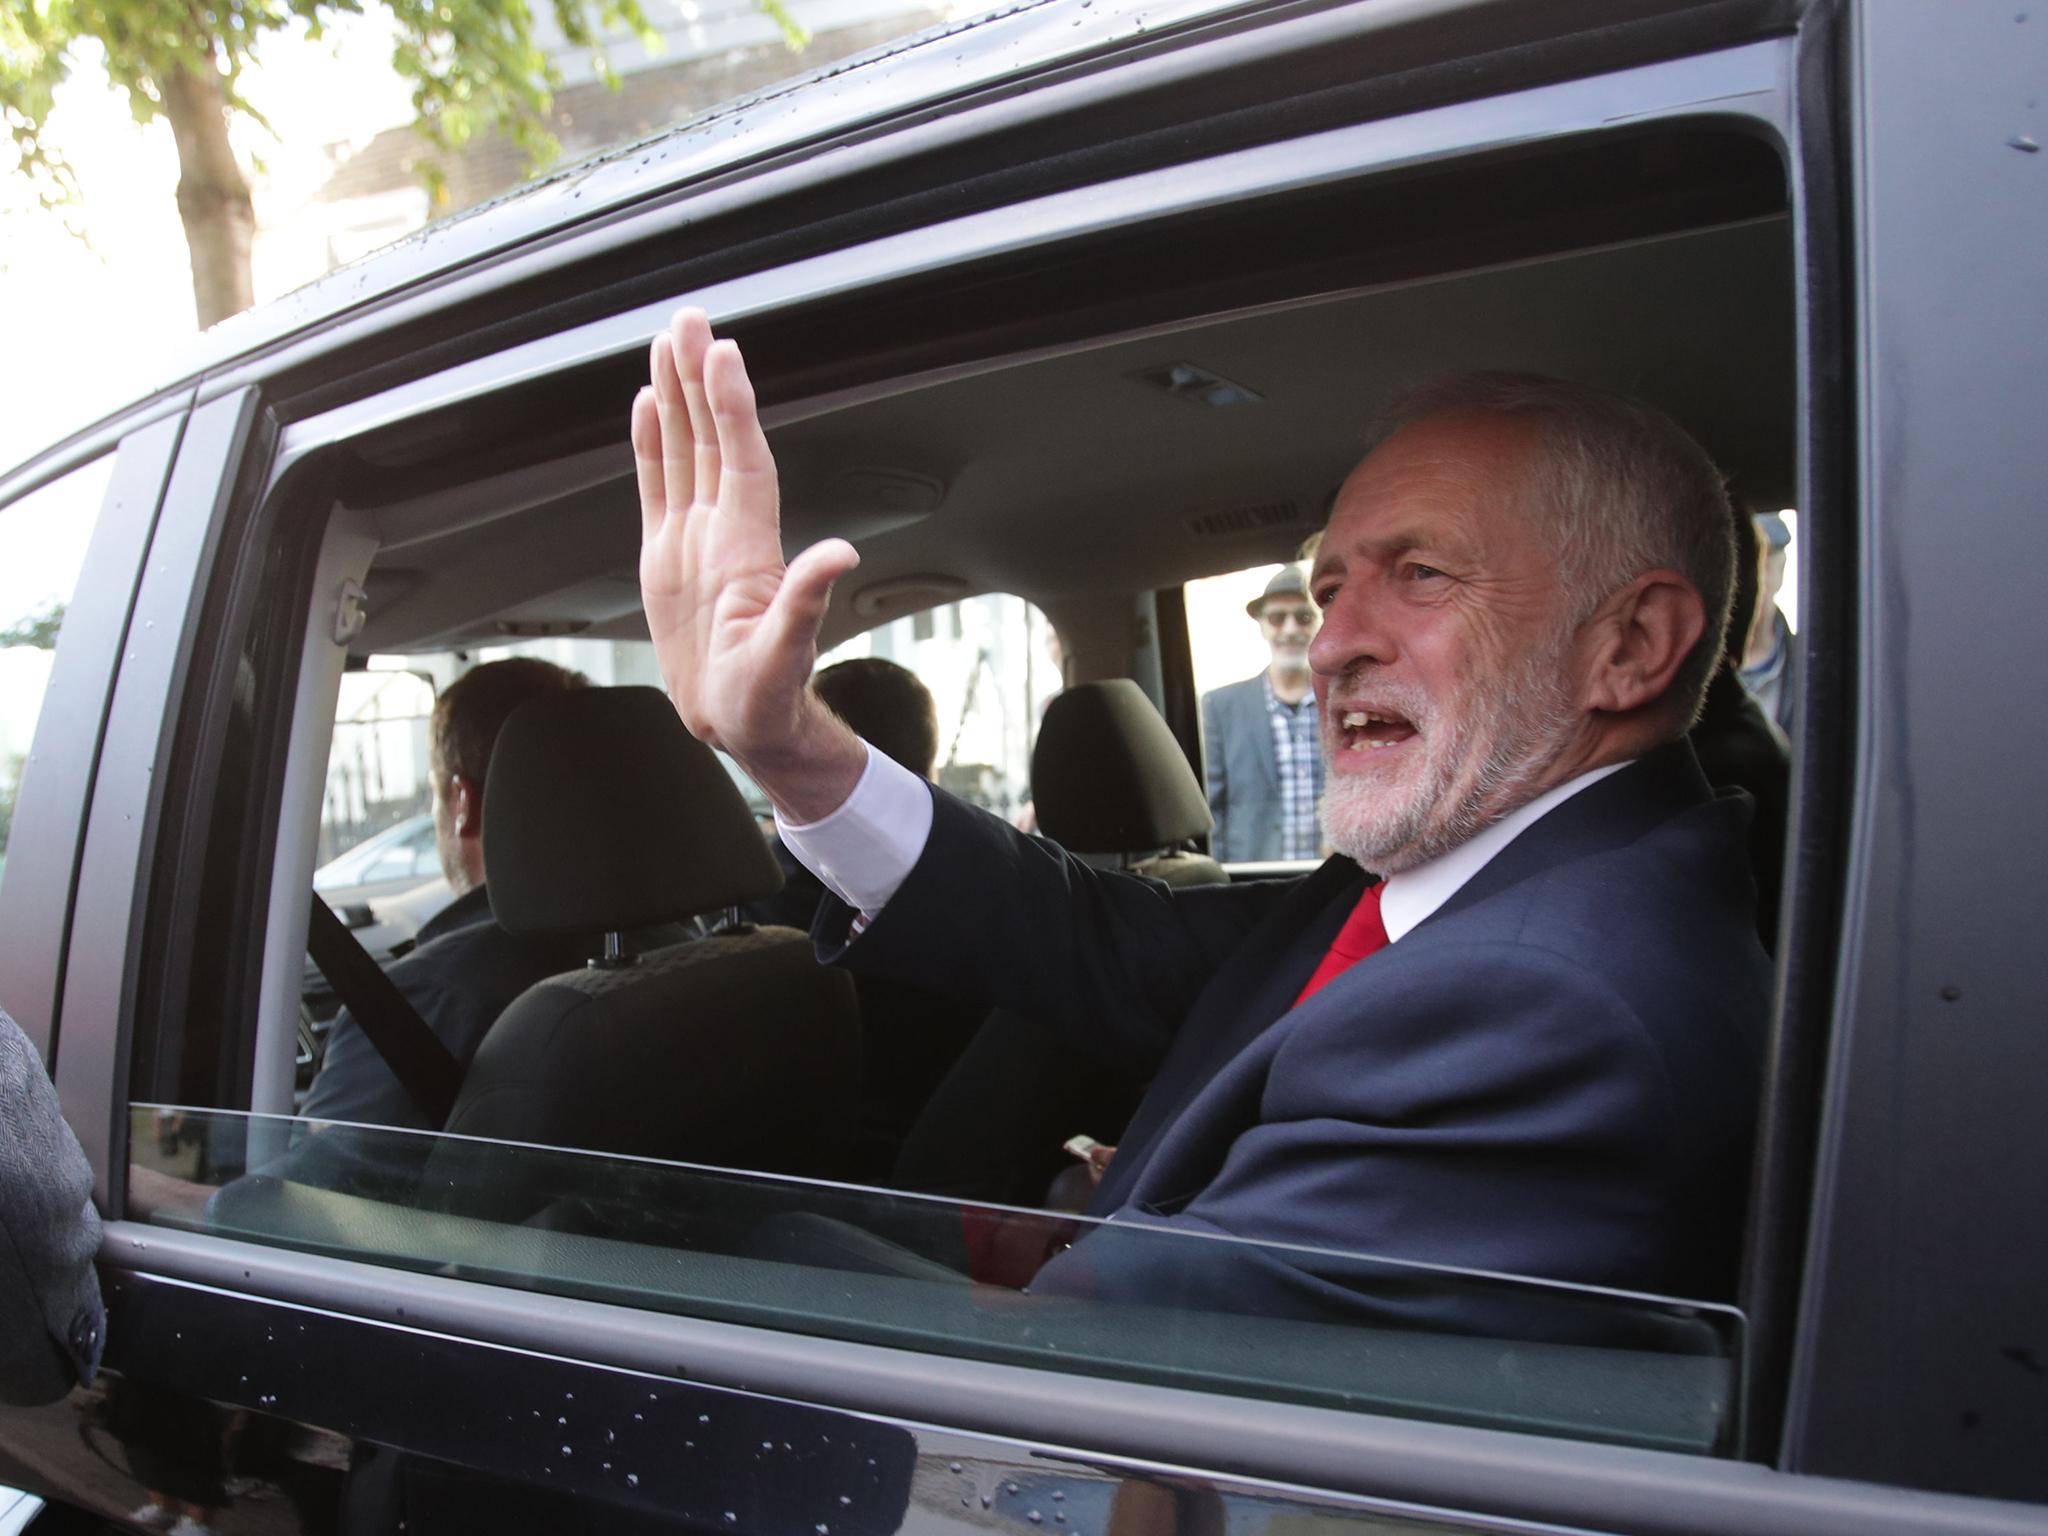 Labour’s rise in popularity suggests a resurgence of the old duopoly in UK politics